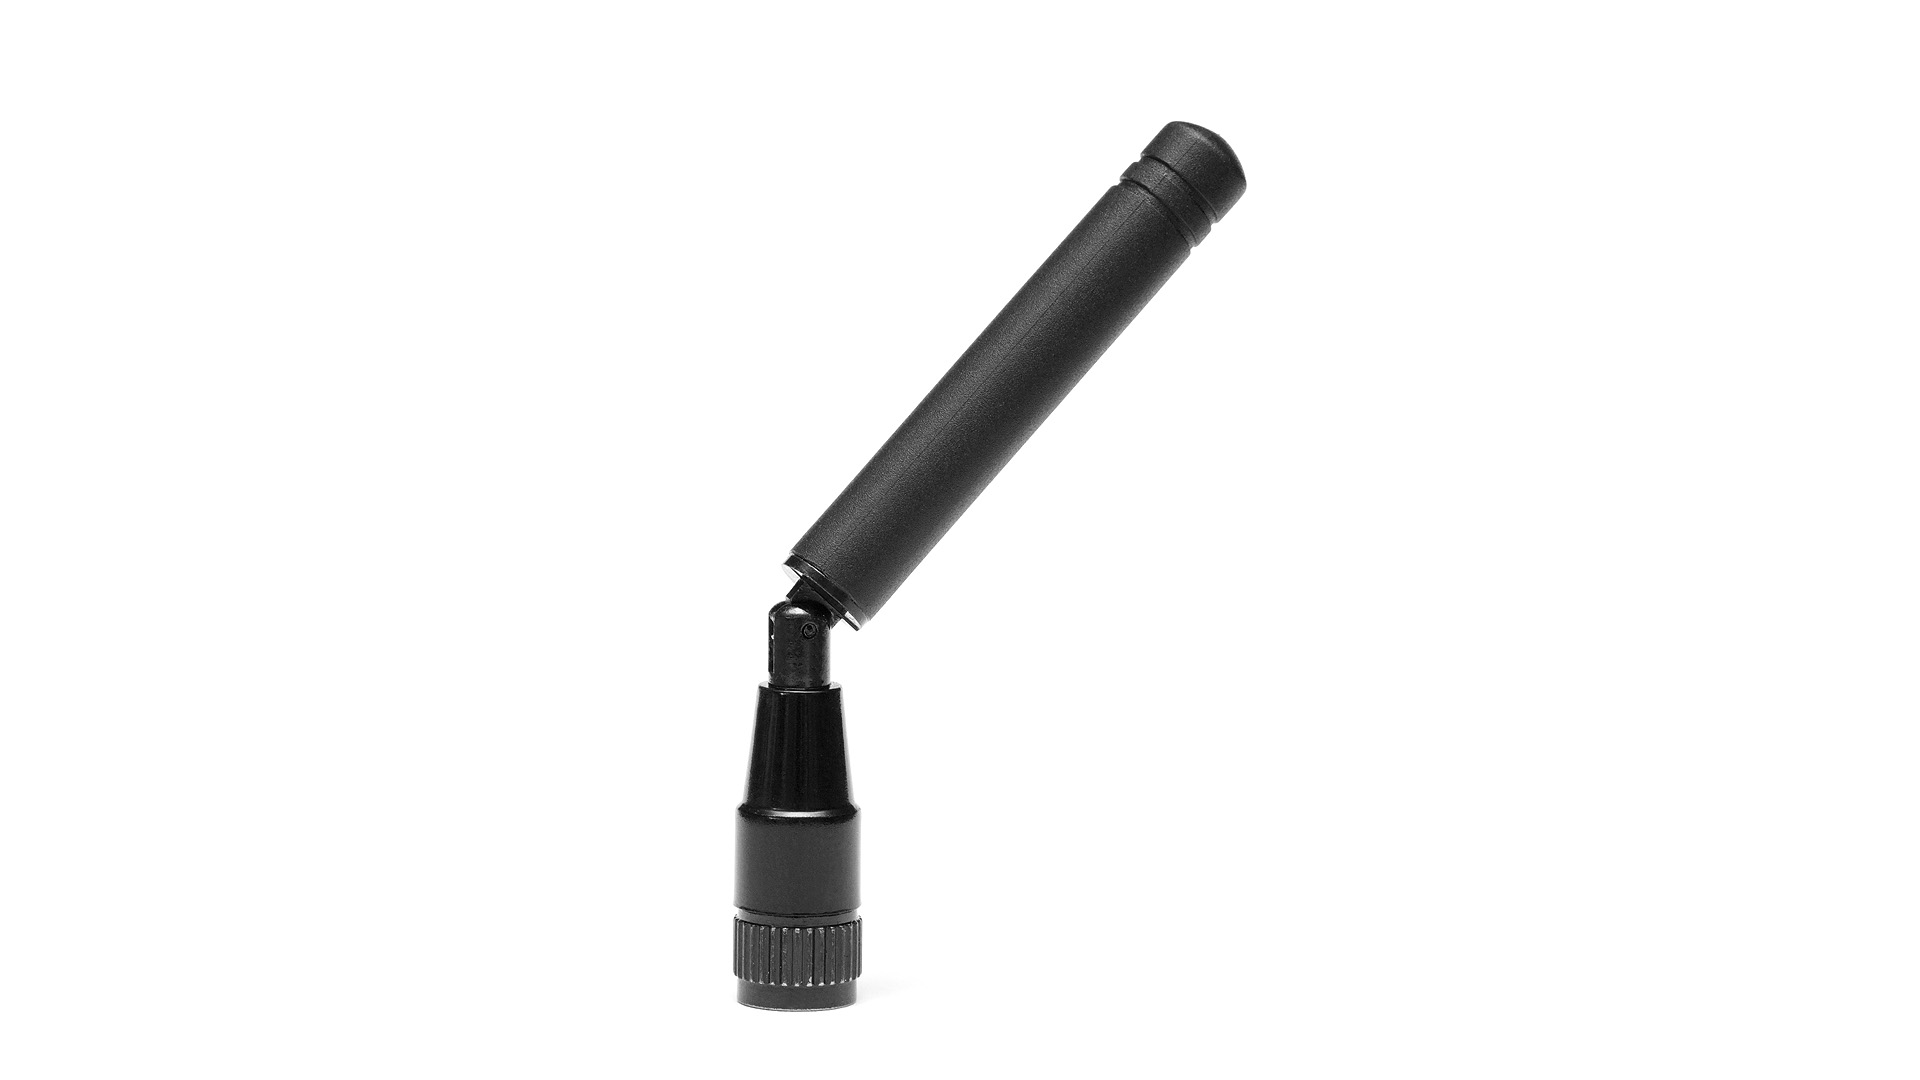 2JW1683 5GNR/4G/3G/2G Ultra-Wide Band Swivel Connector Antenna 